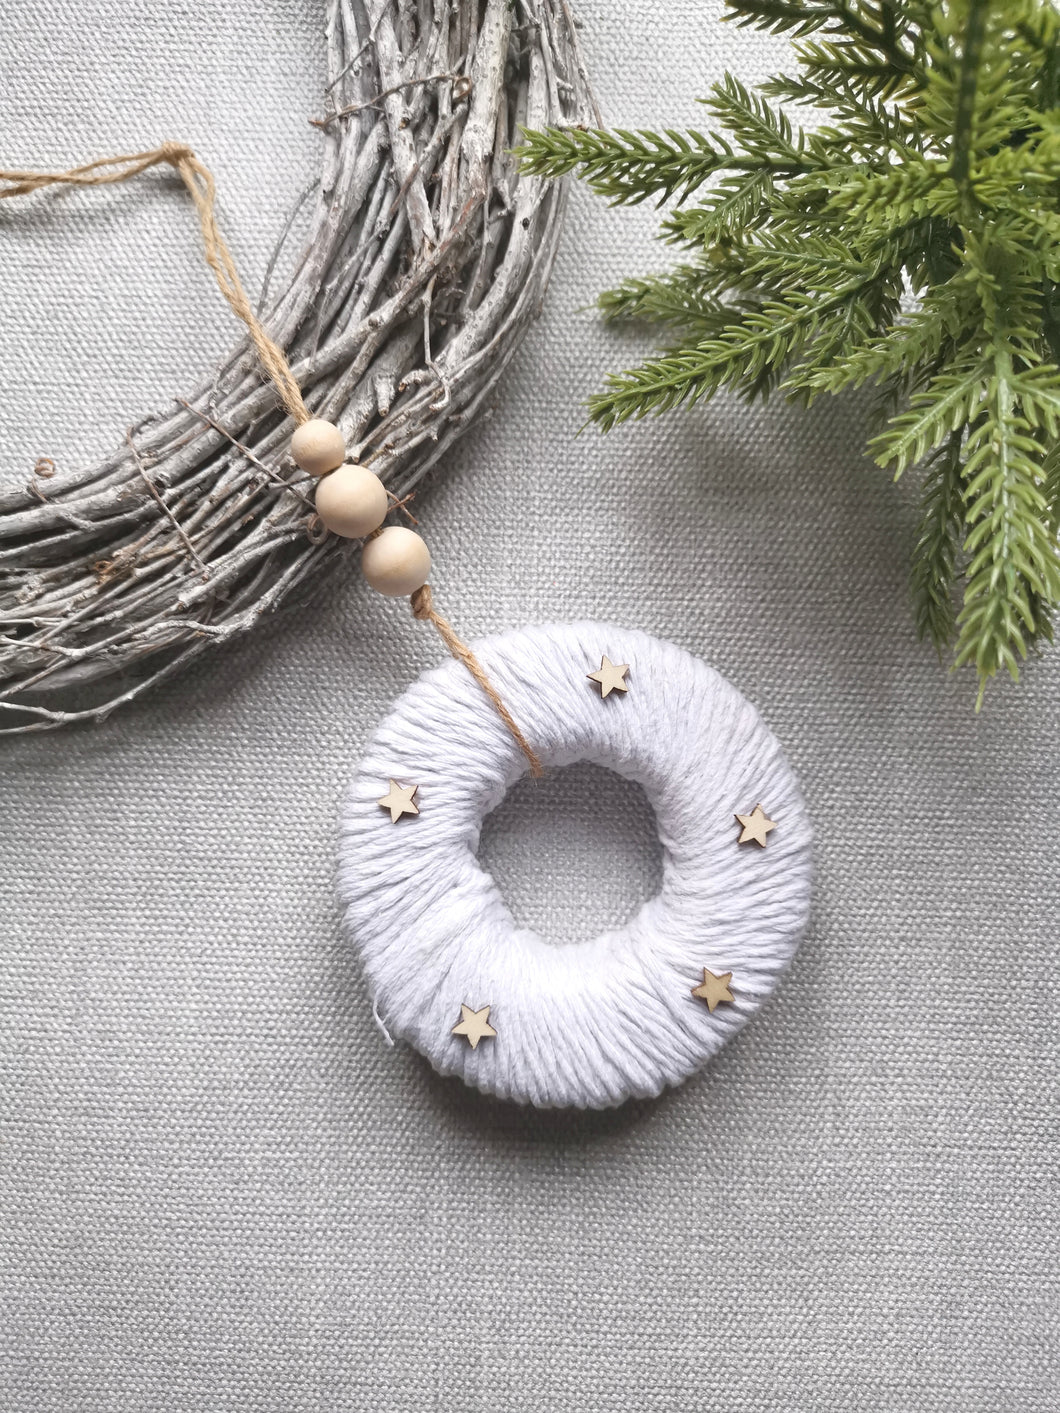 Small Christmas Wreath with wooden stars